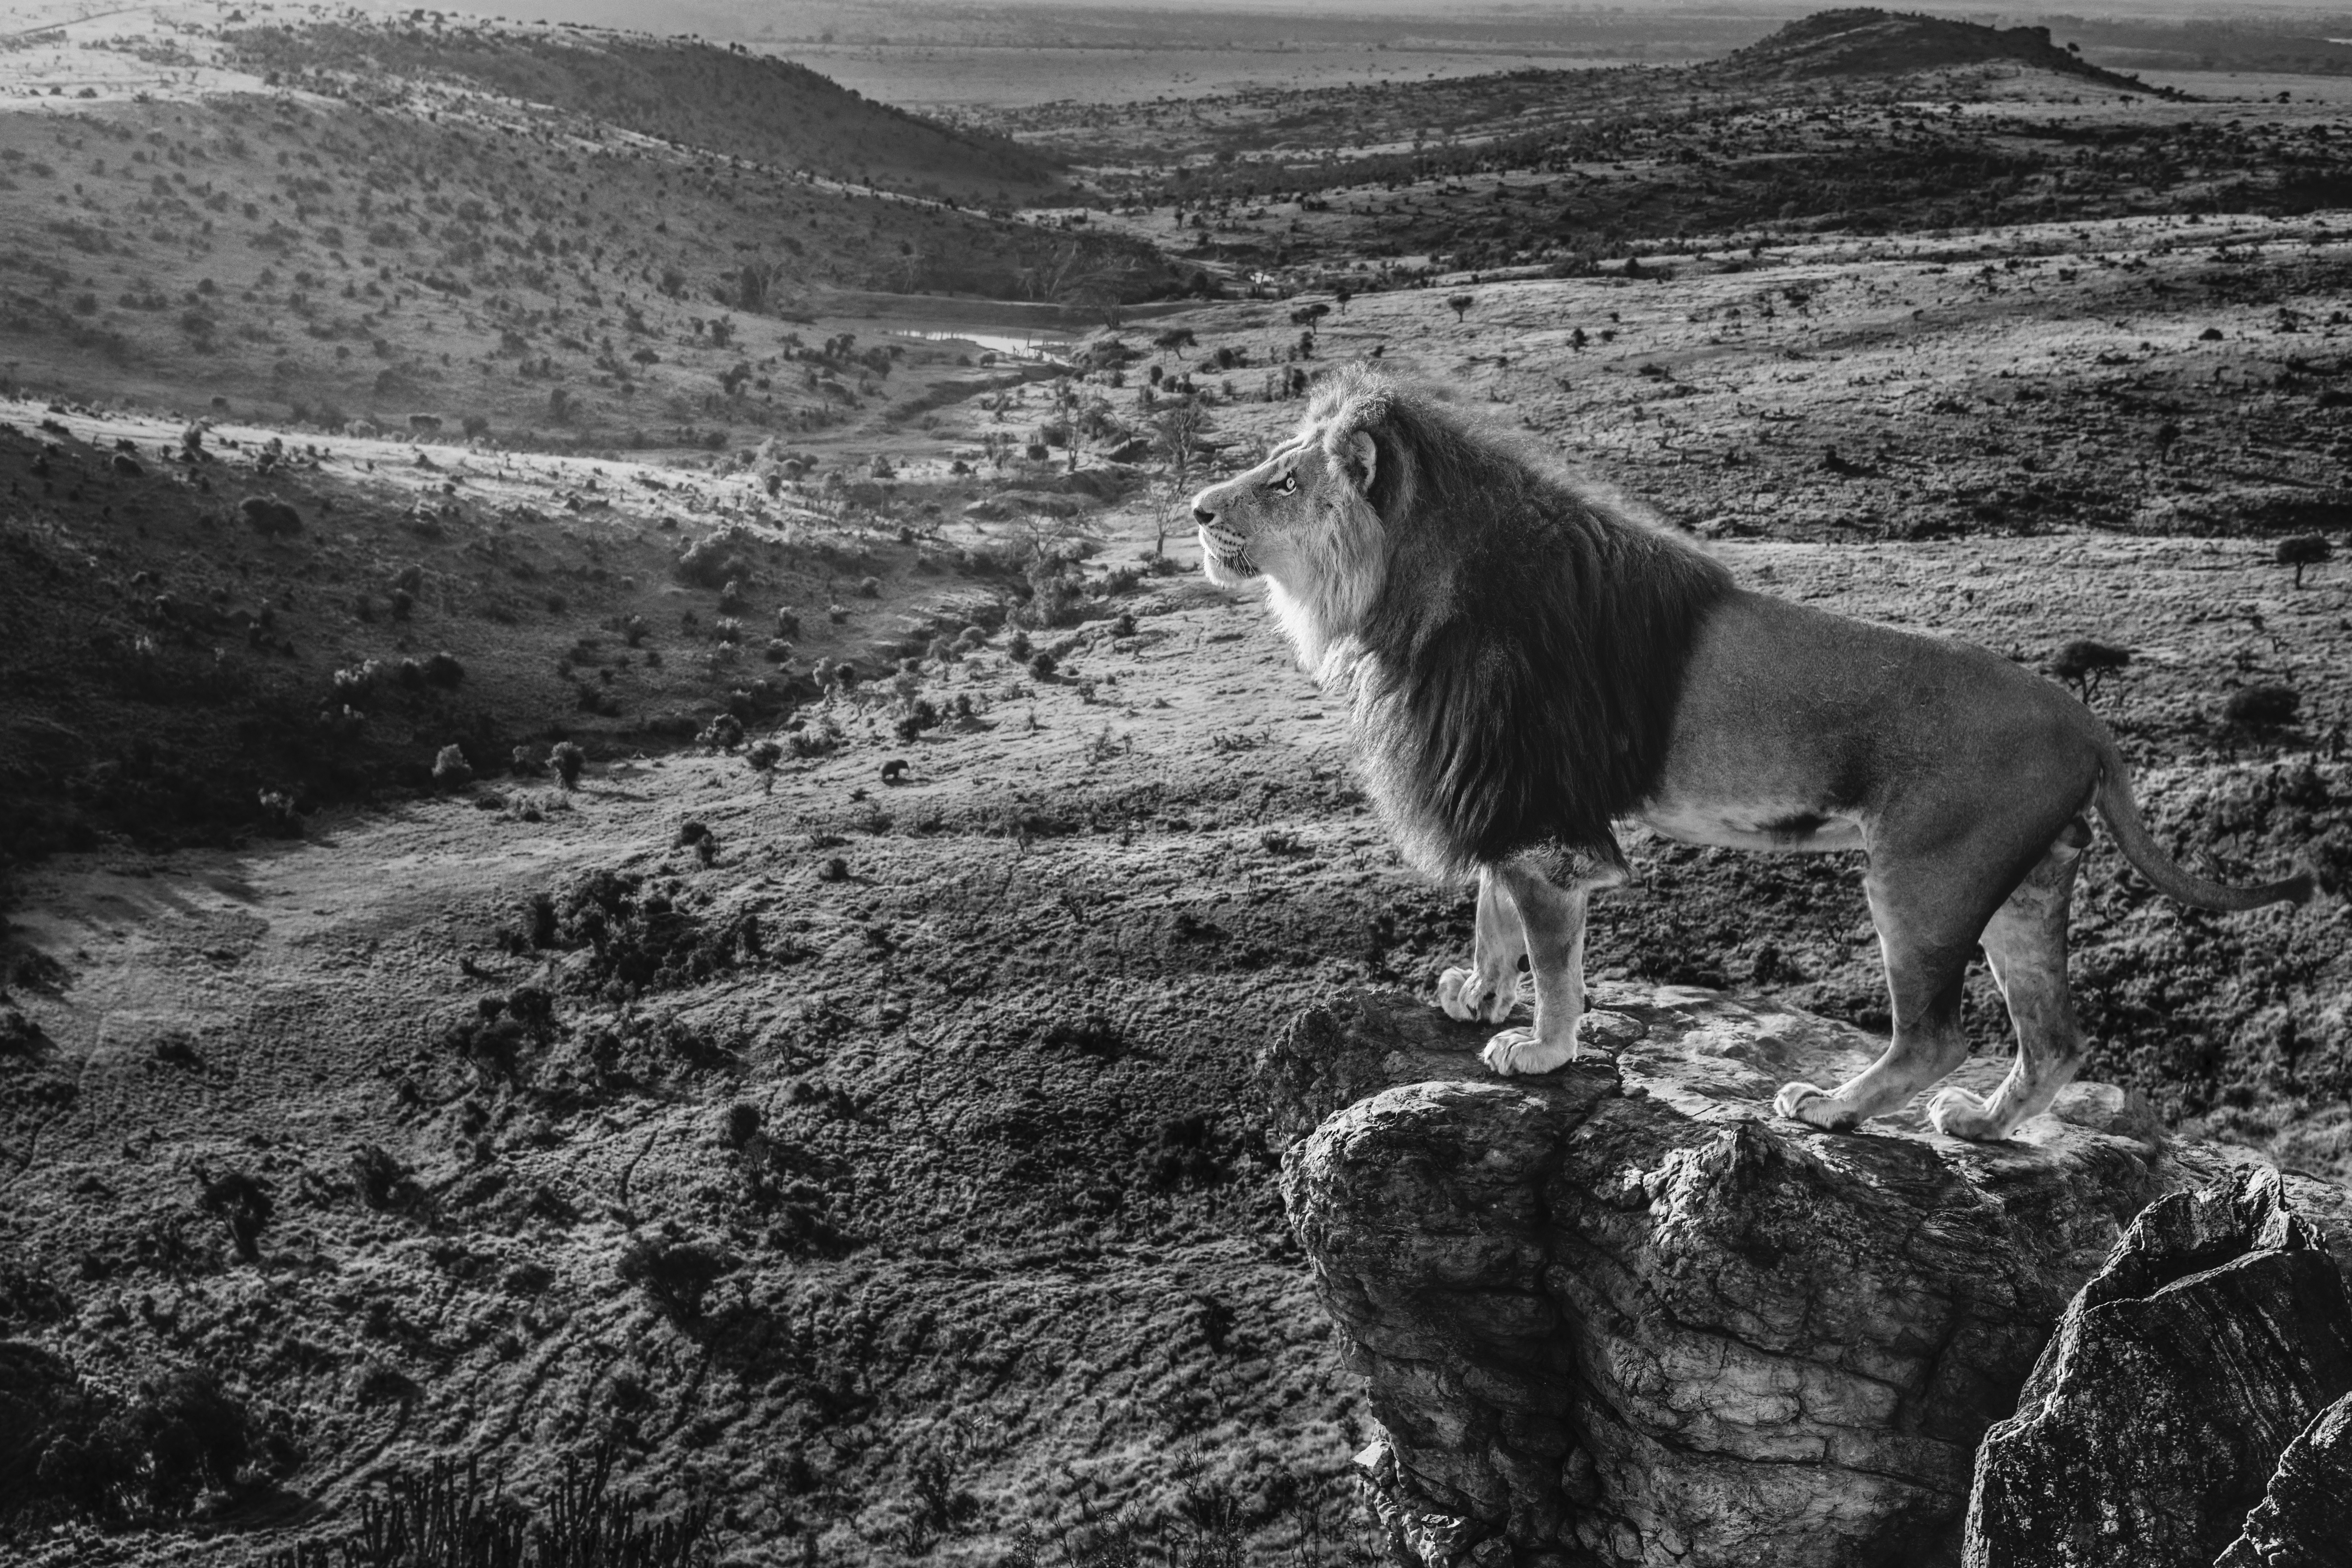 David's image of a lion on Pride Rock is a composite of two images, recreating the iconic scene of Simba in The Lion King